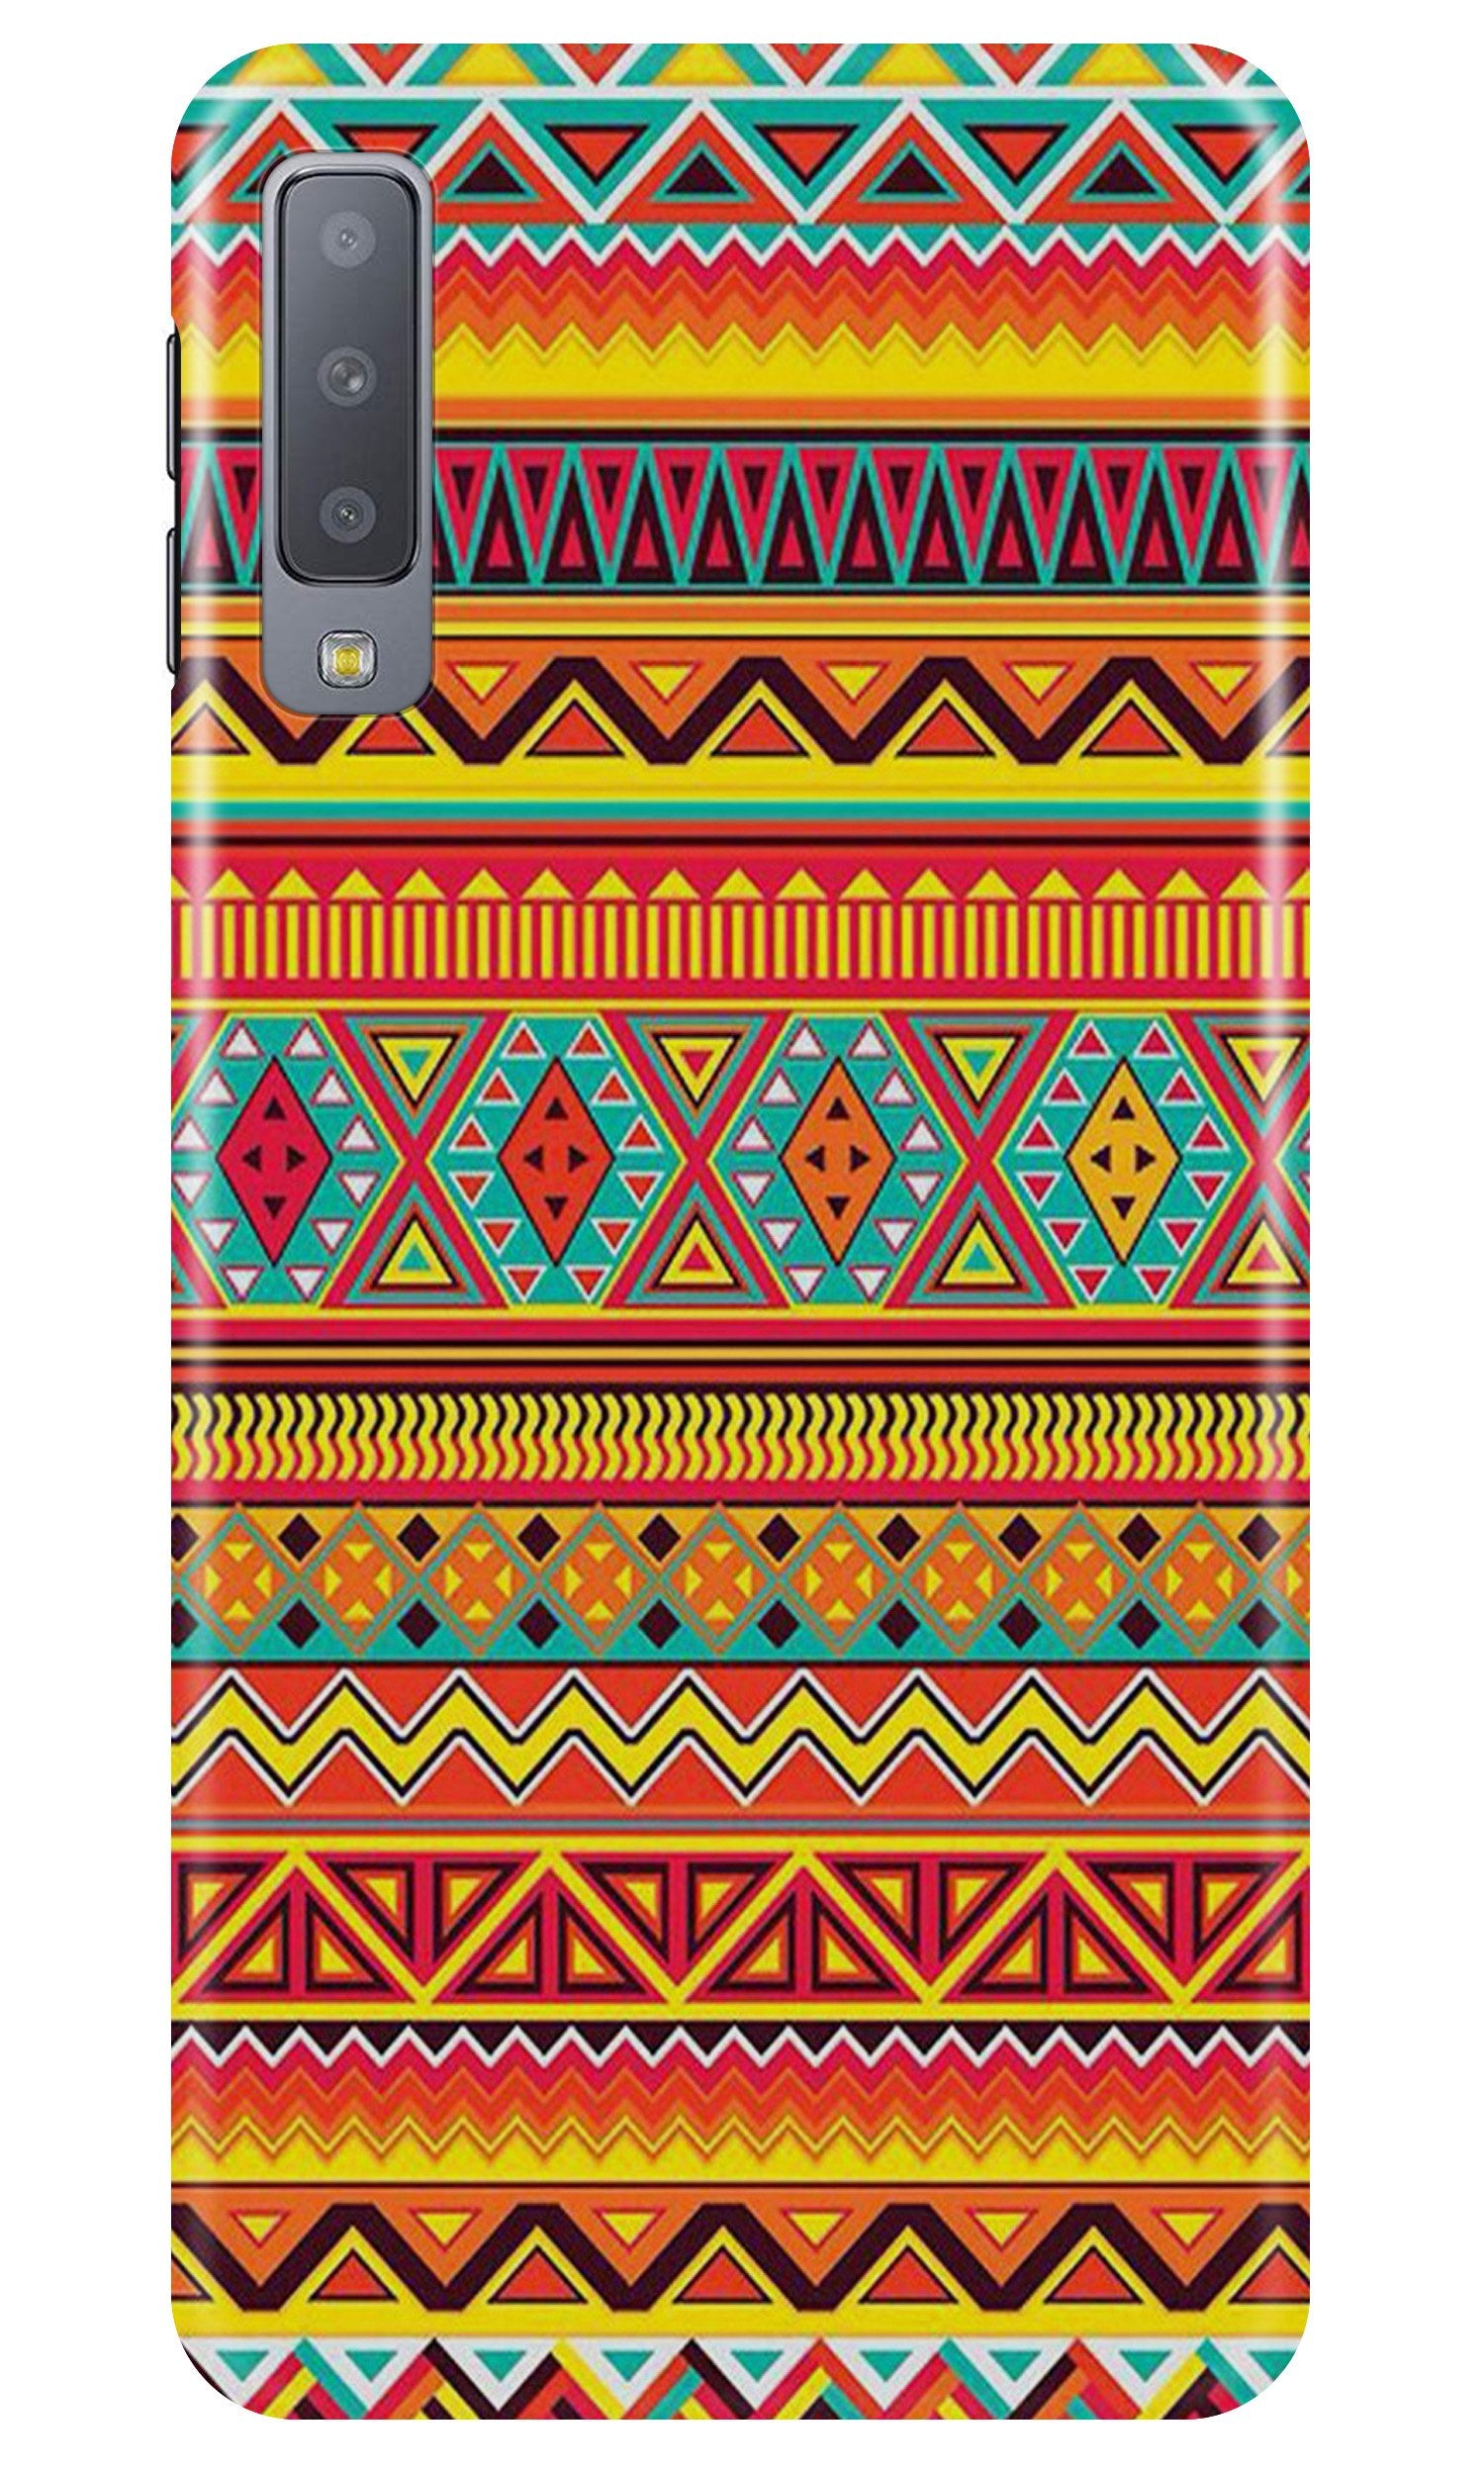 Zigzag line pattern Case for Galaxy A7 (2018)